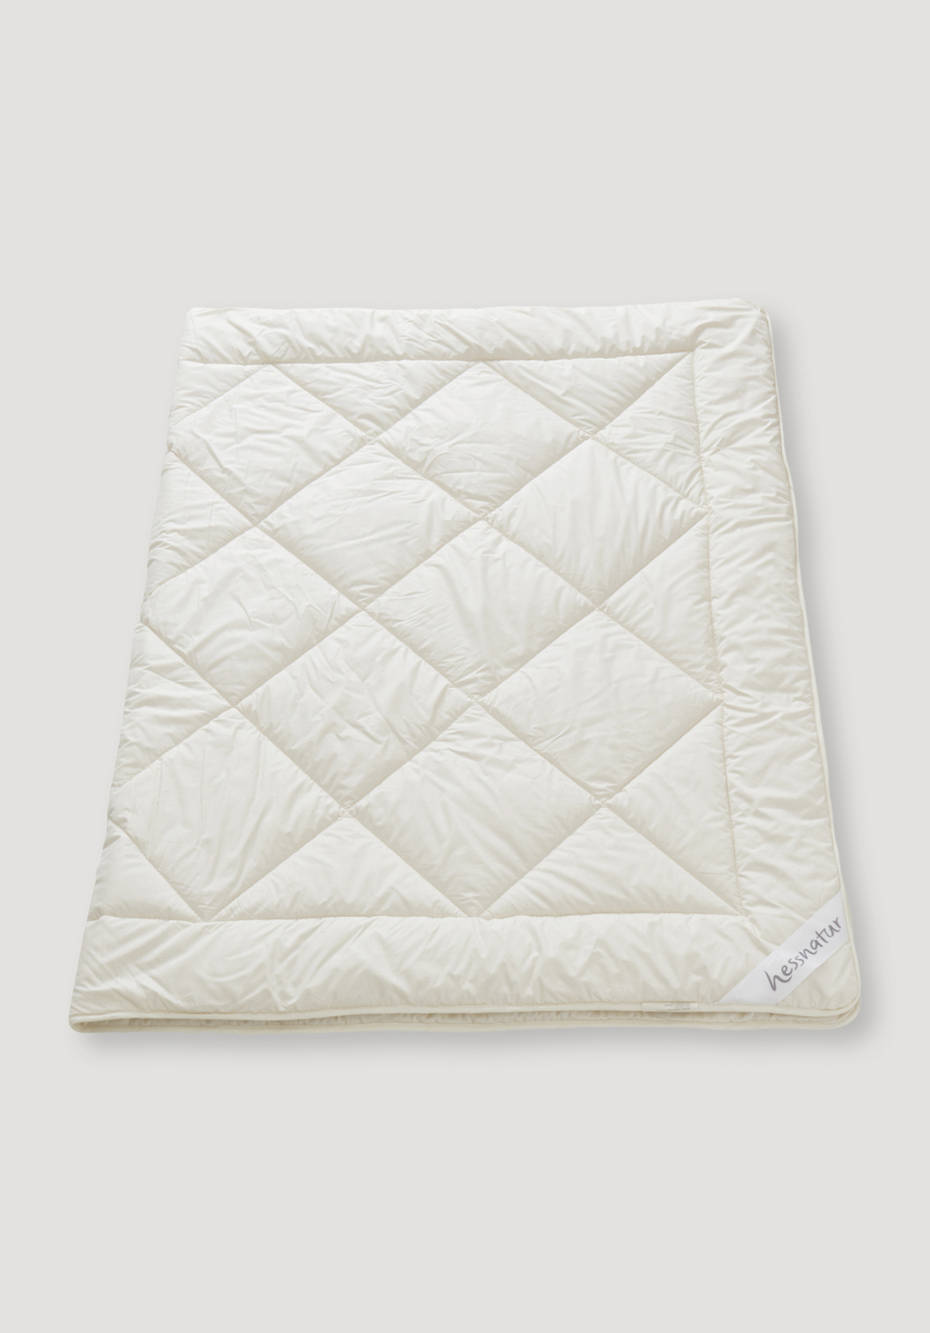 Duo blanket made of pure organic cotton